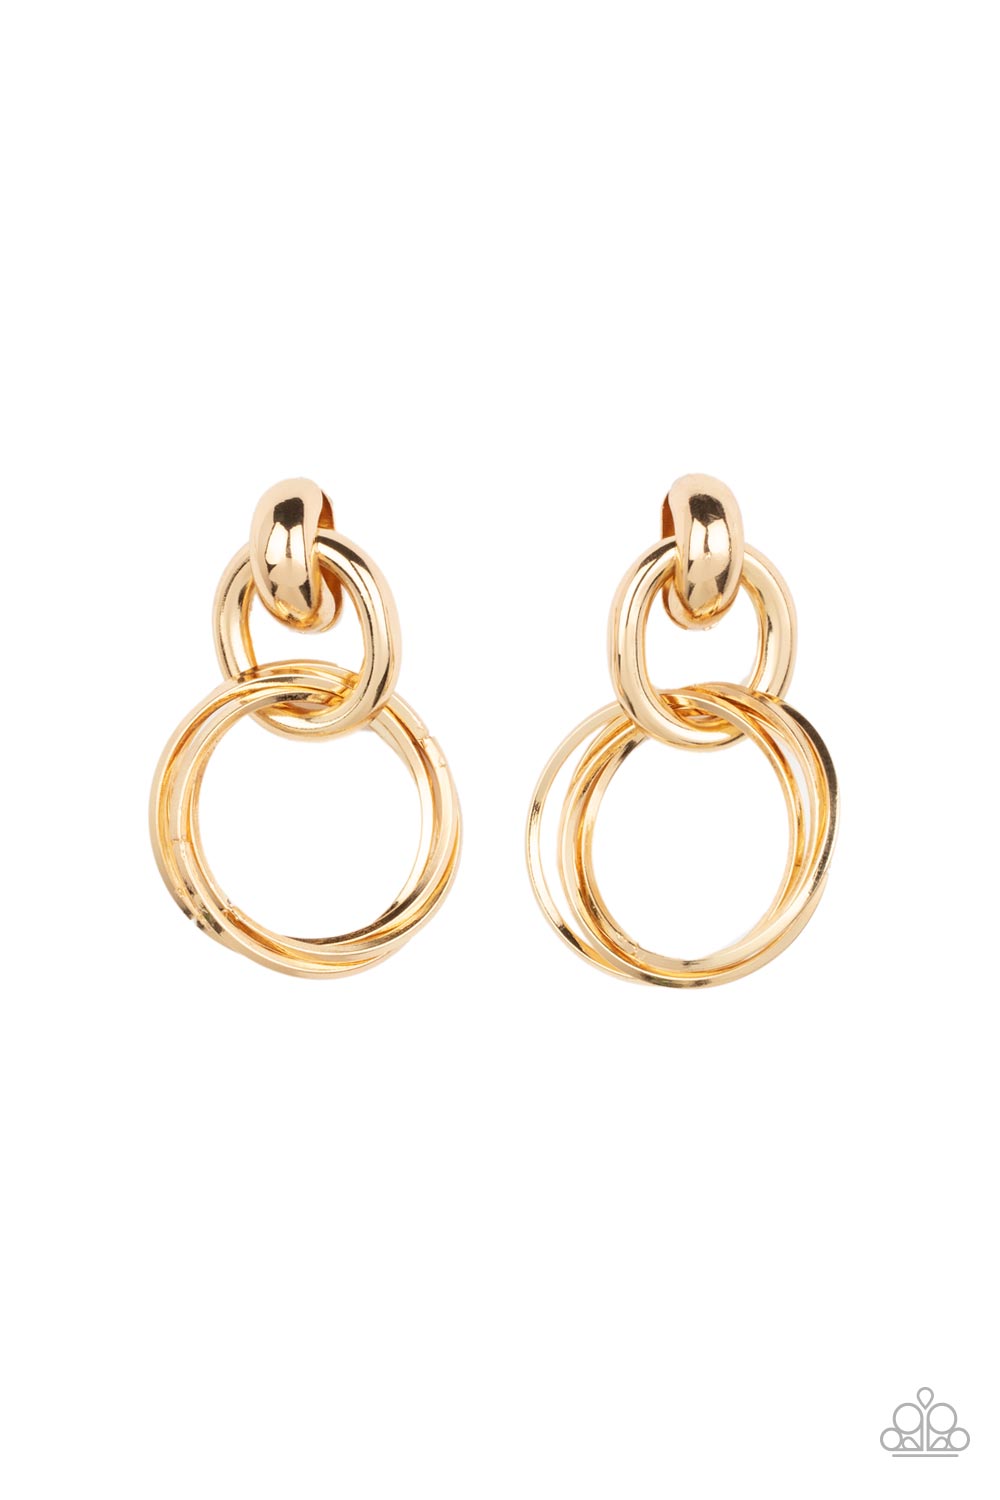 Dynamically Linked - Gold Twist Earrings glistening gold hoops are threaded through a bold gold fitting, adding a timeless twist to the dynamic display. Earring attaches to a standard post fitting.  Sold as one pair of post earrings.